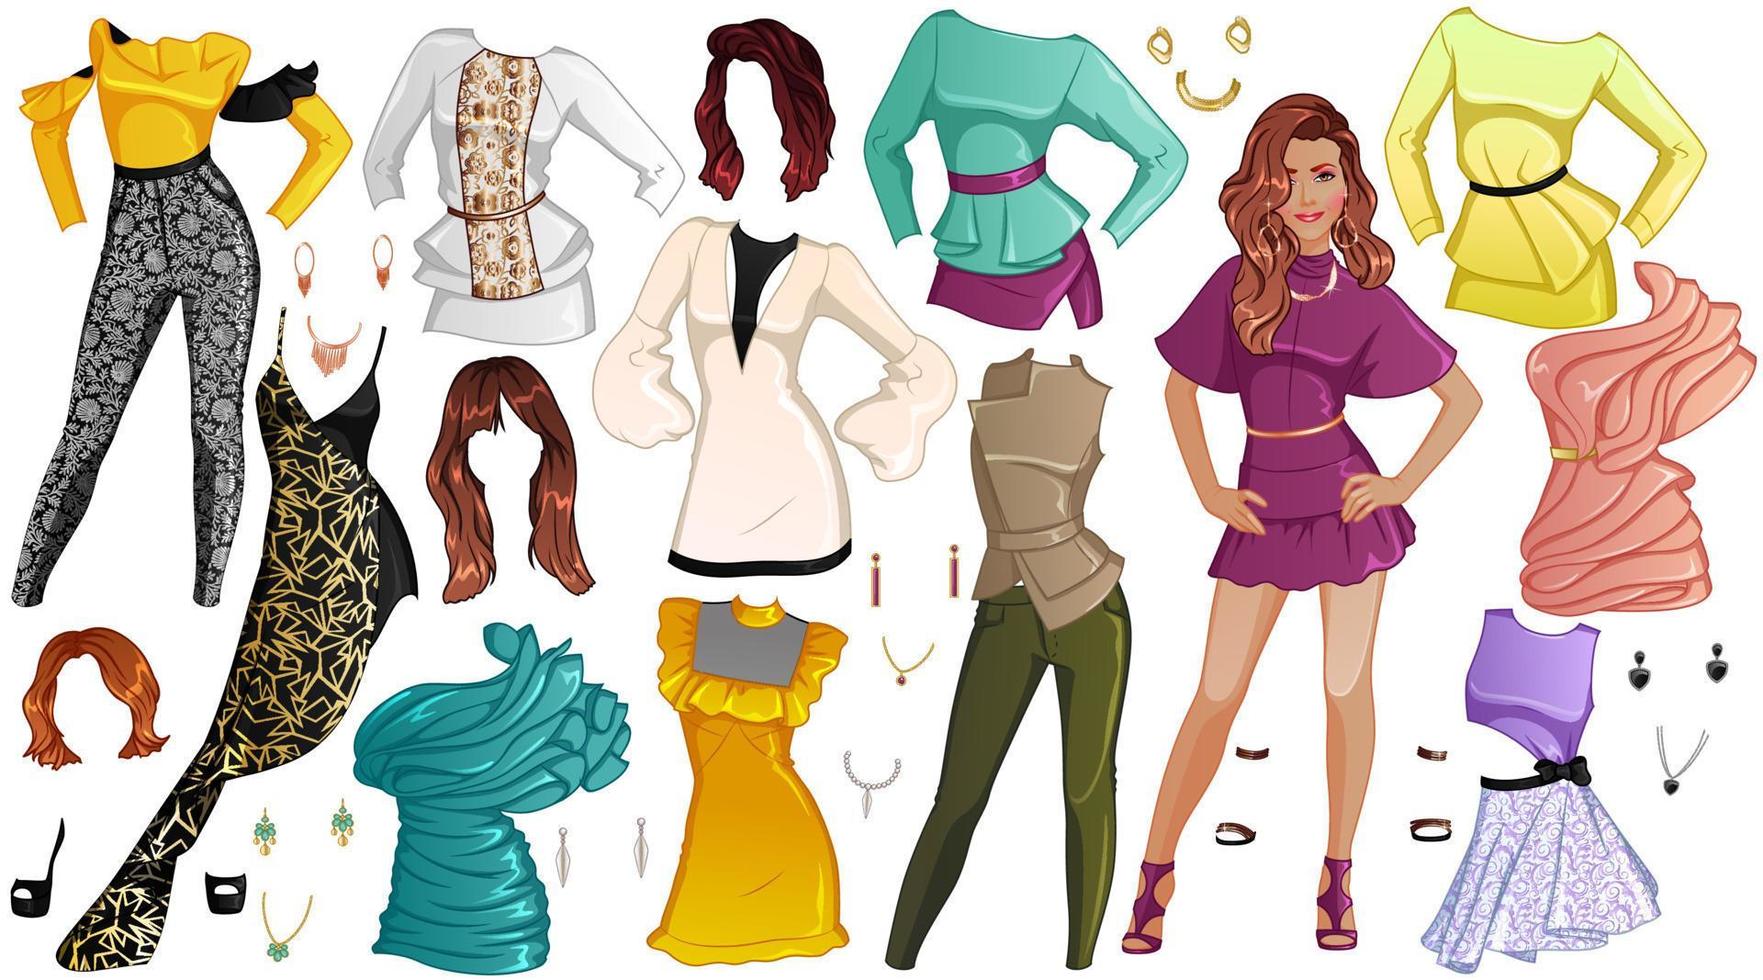 Premium Vector, Variety cute dress for paper doll girl vector